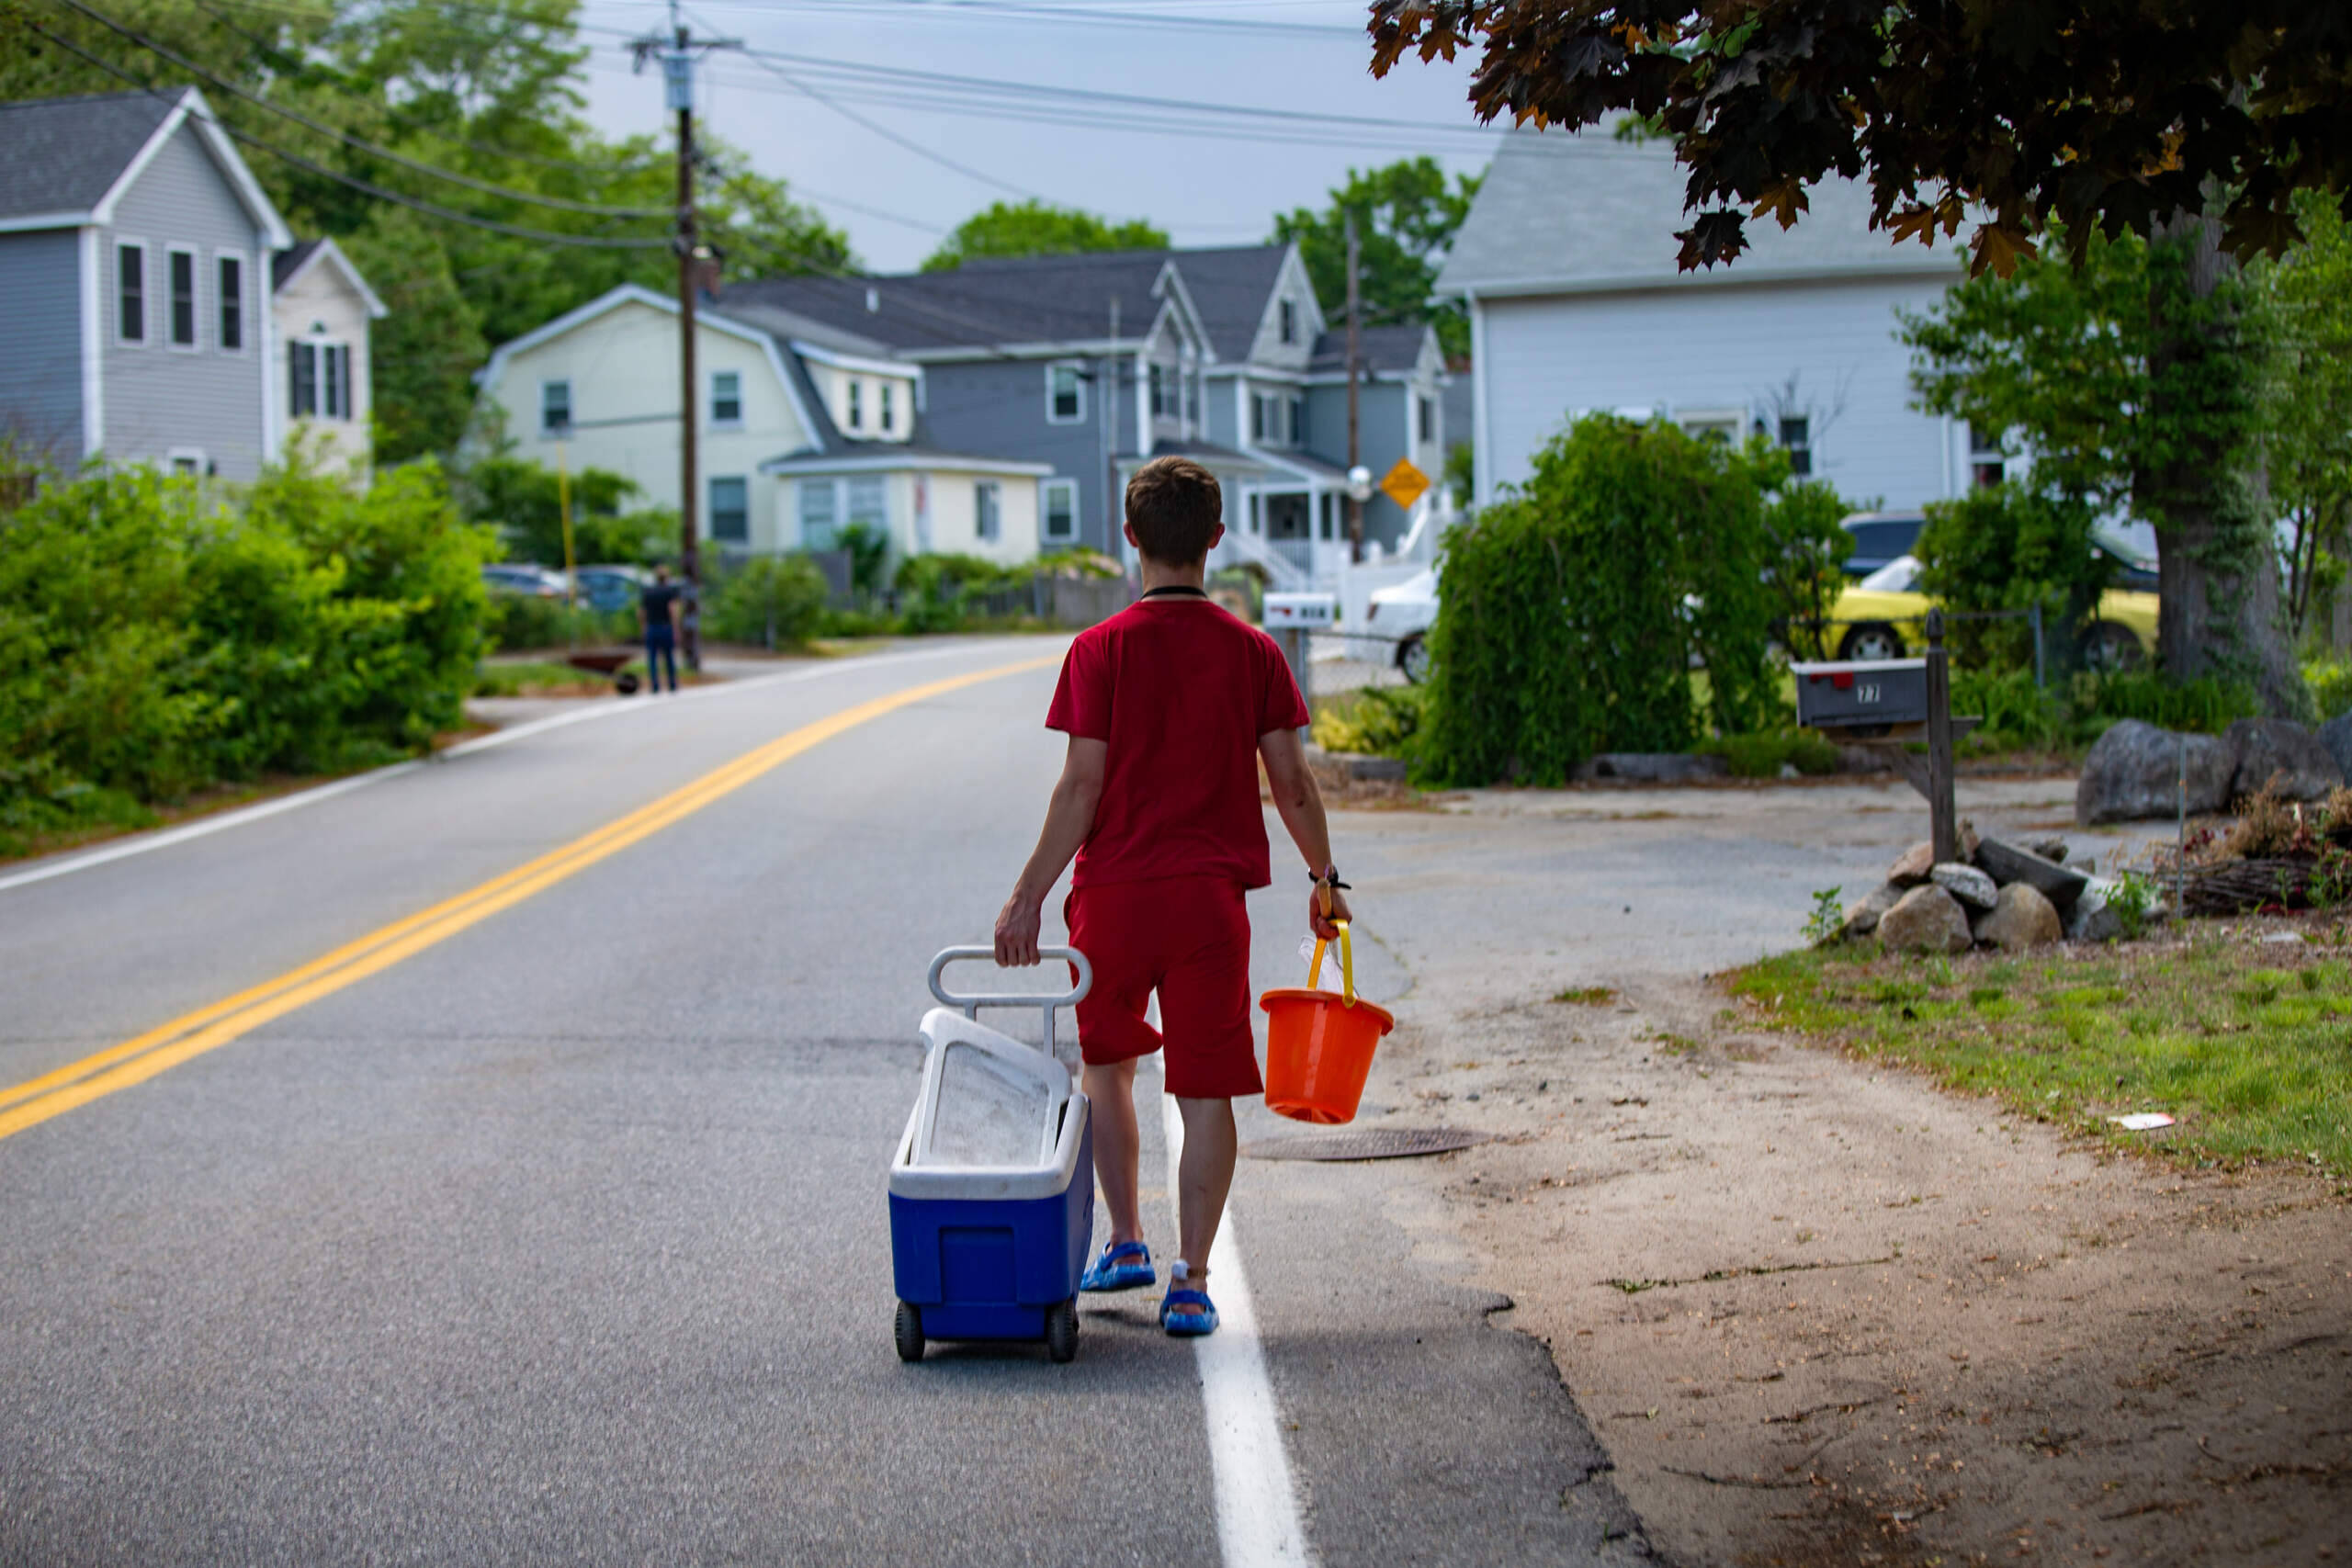 Connor Biscan walks very fast to get home to beat a thunderstorm that was entering the area after fishing at Silver Lake. (Jesse Costa/WBUR)